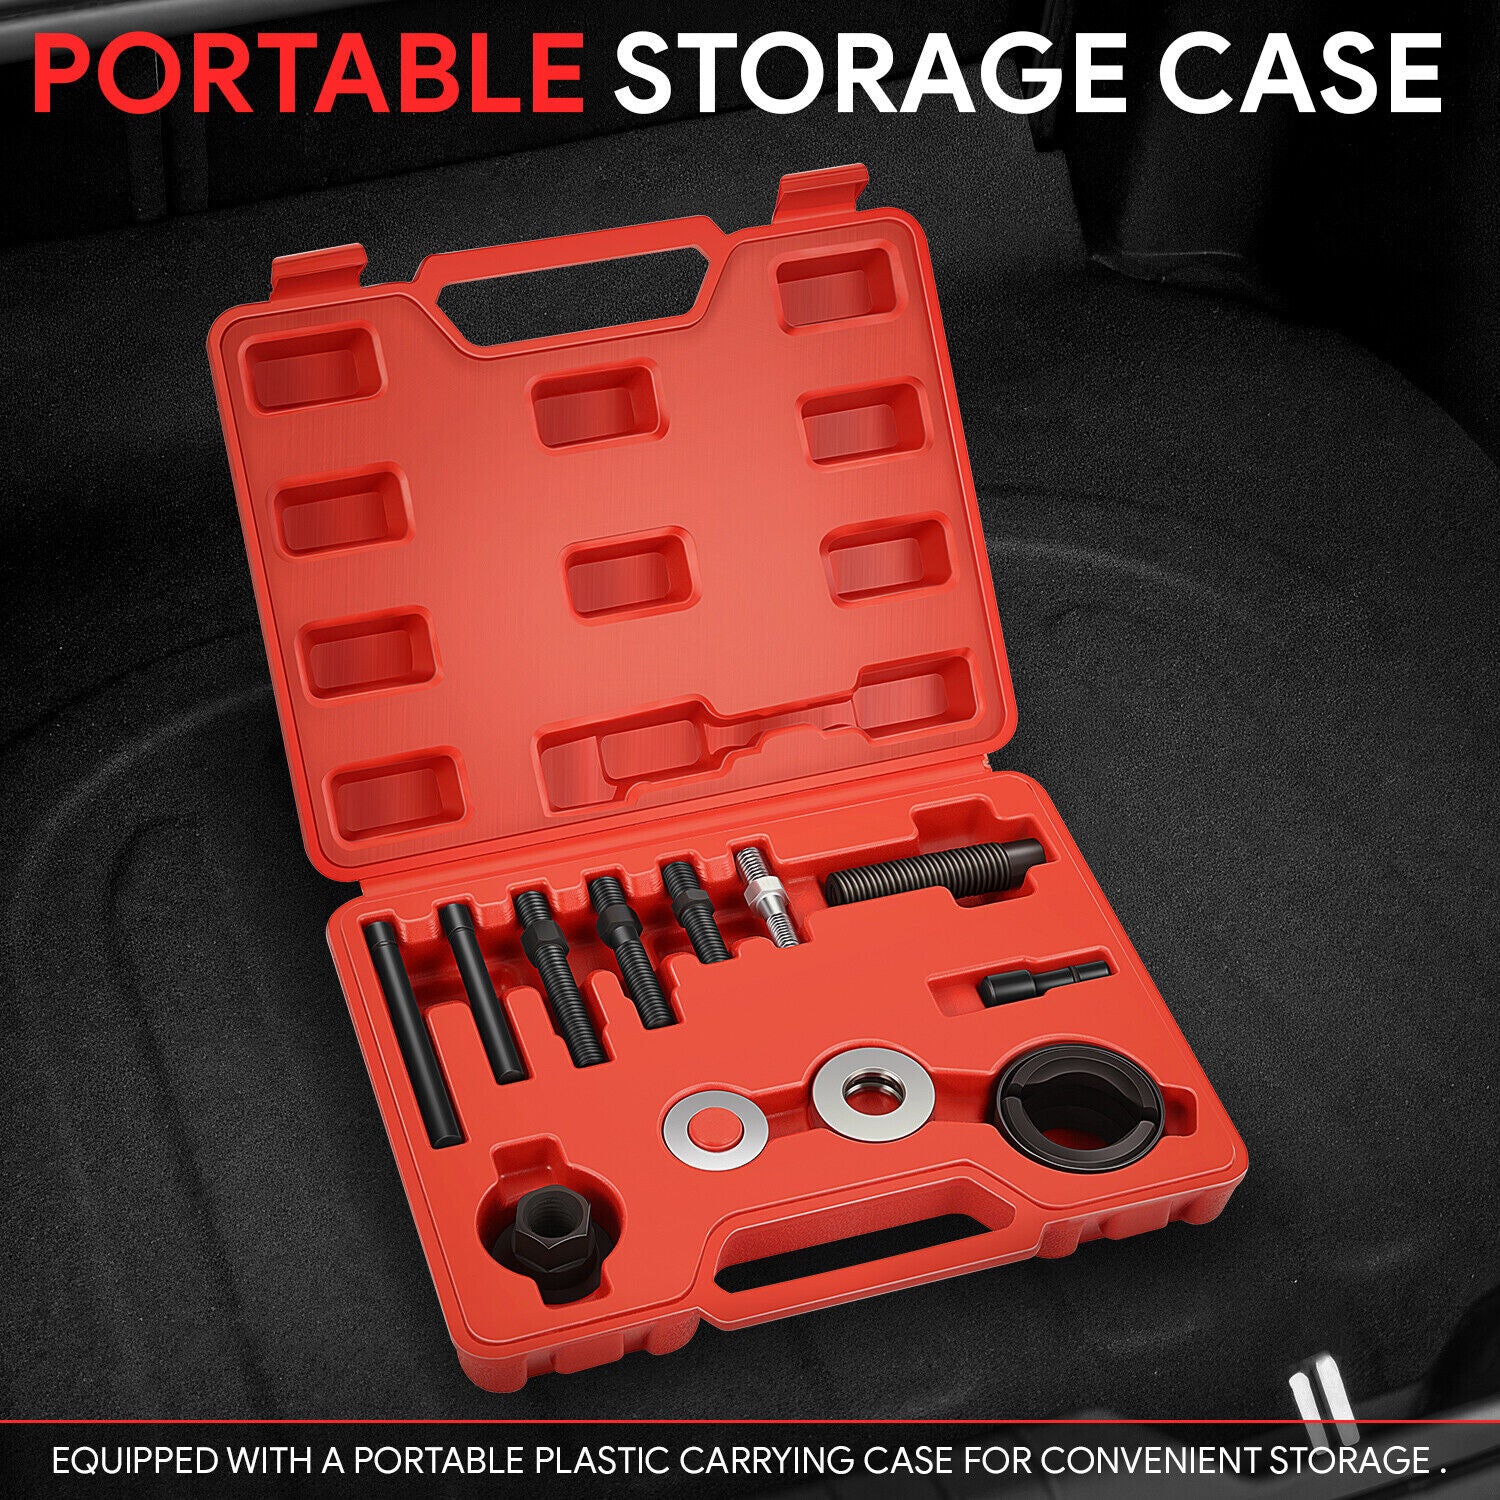 12Pcs Power Steering Pulley Puller Remover and Installer Tool Kit W/Storage Case